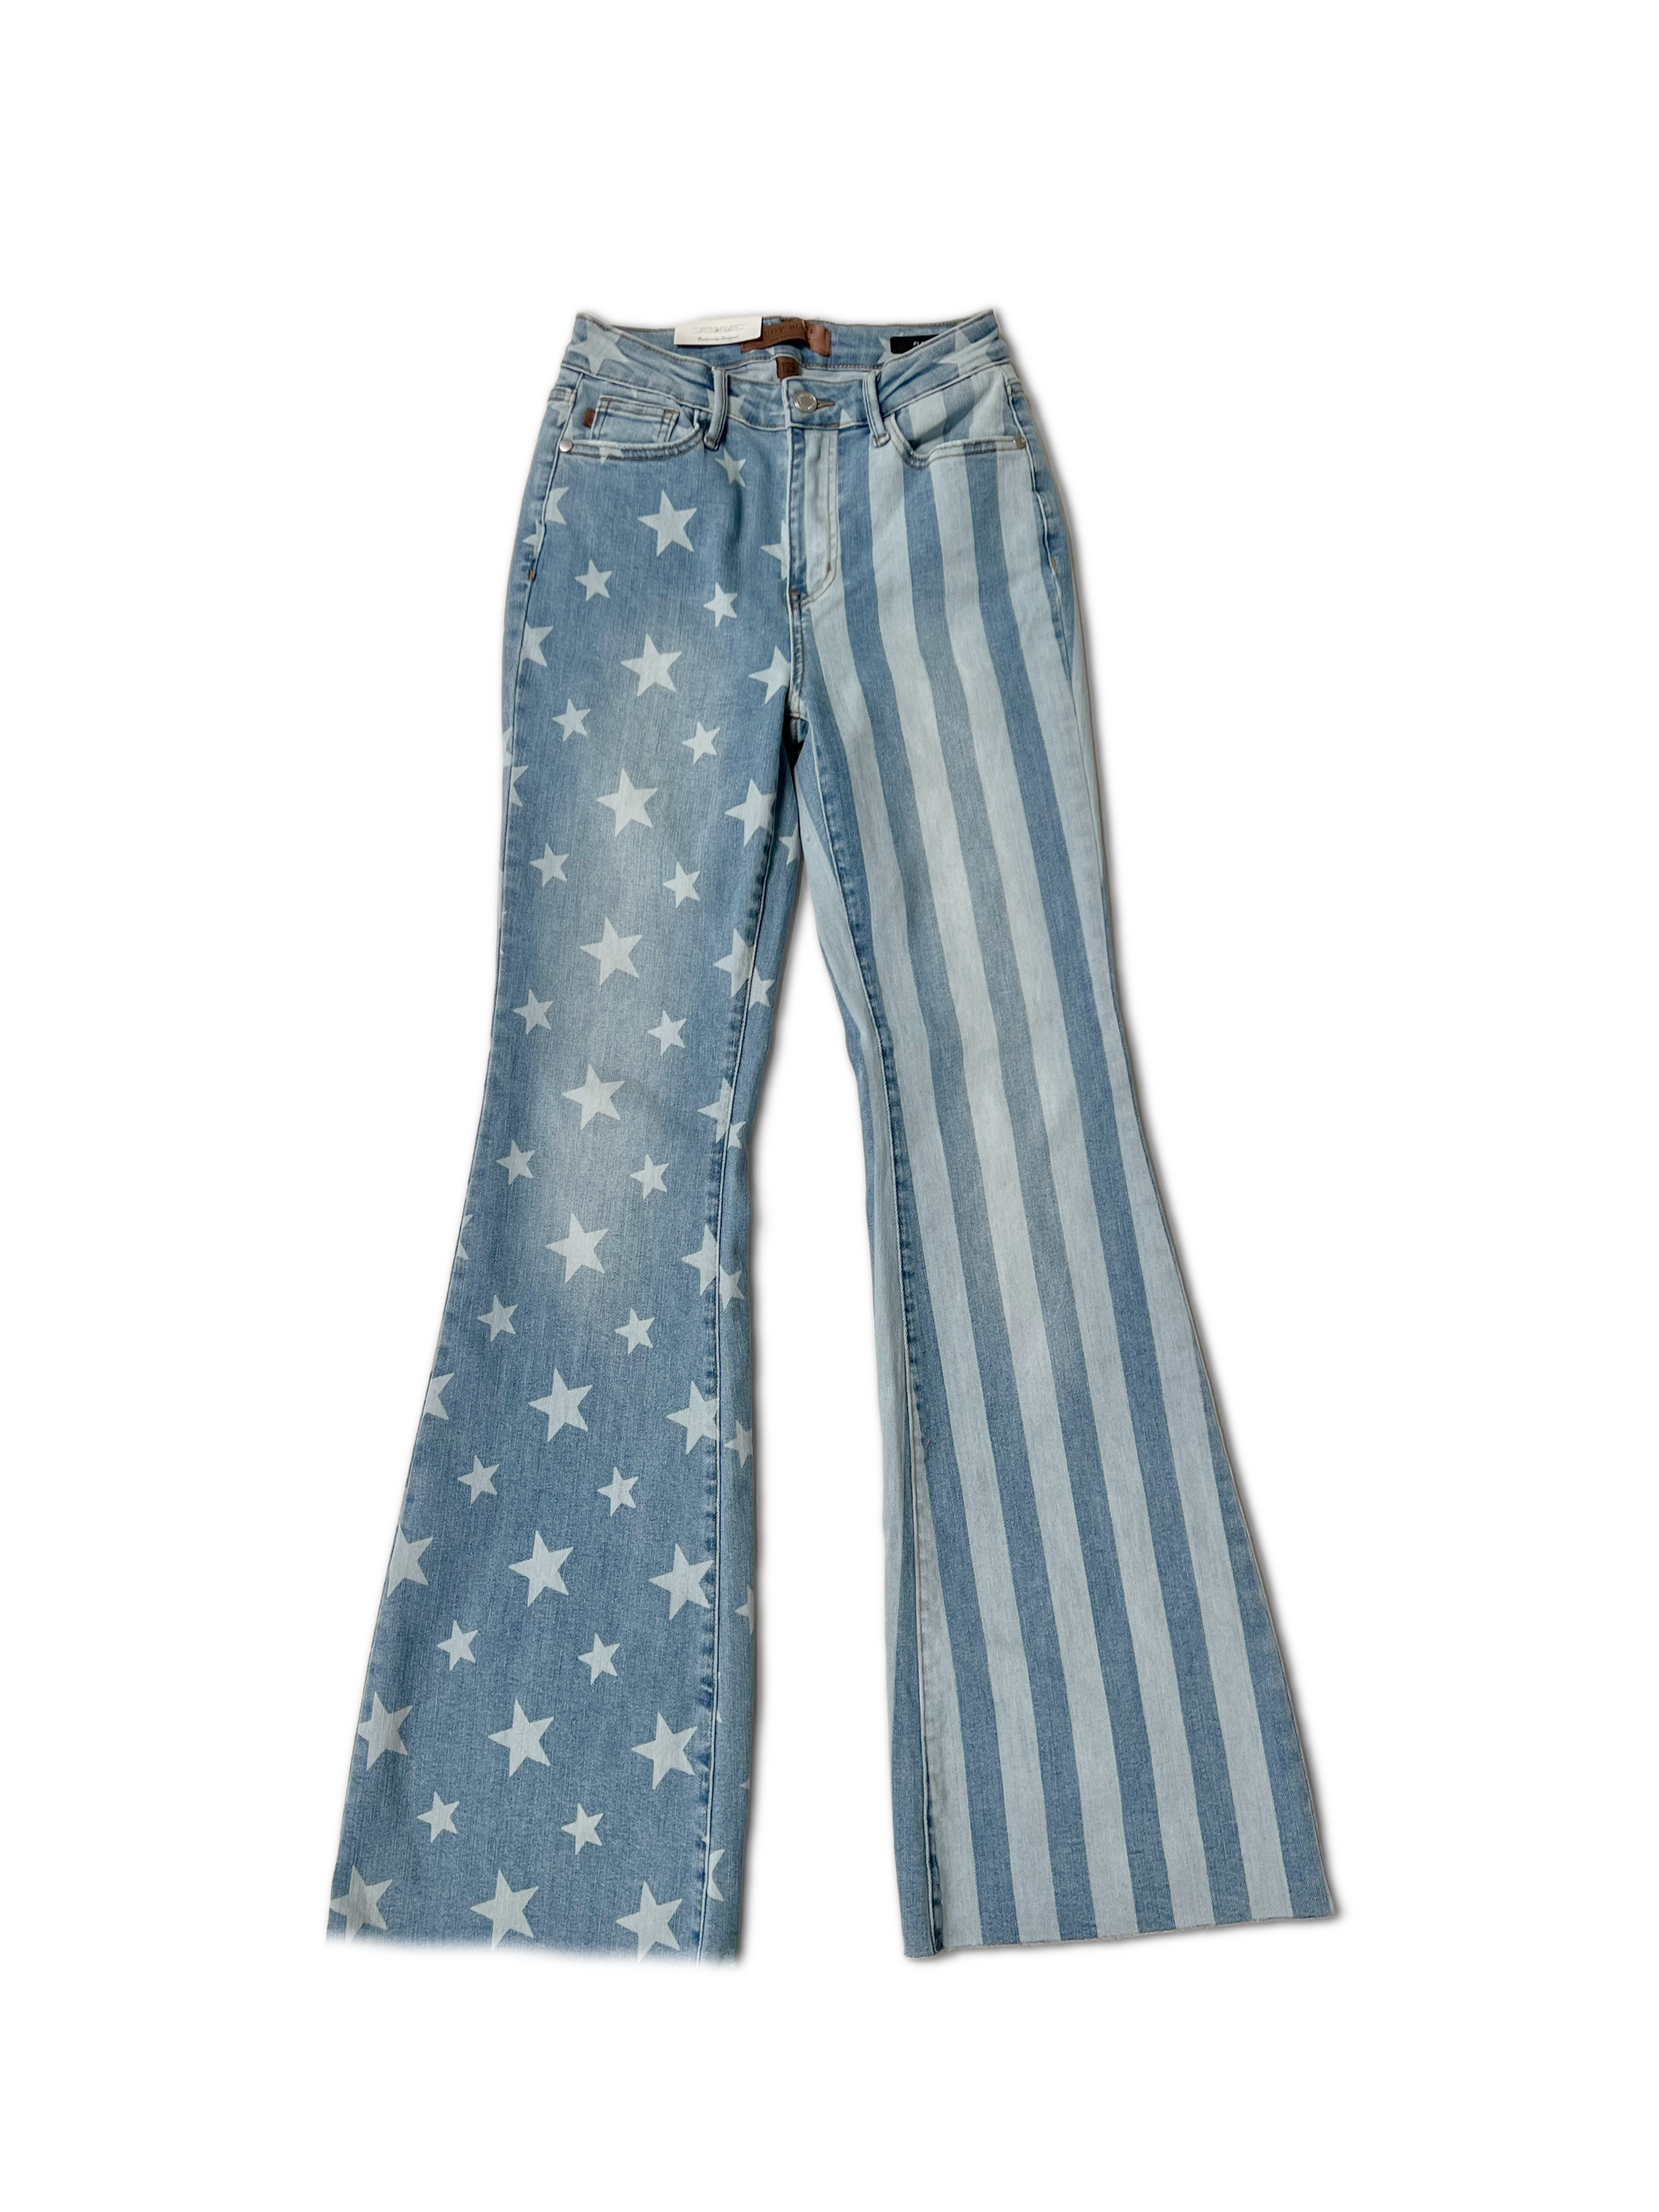 Freedom Rings - Judy Blue Flares  JB Boutique Simplified   